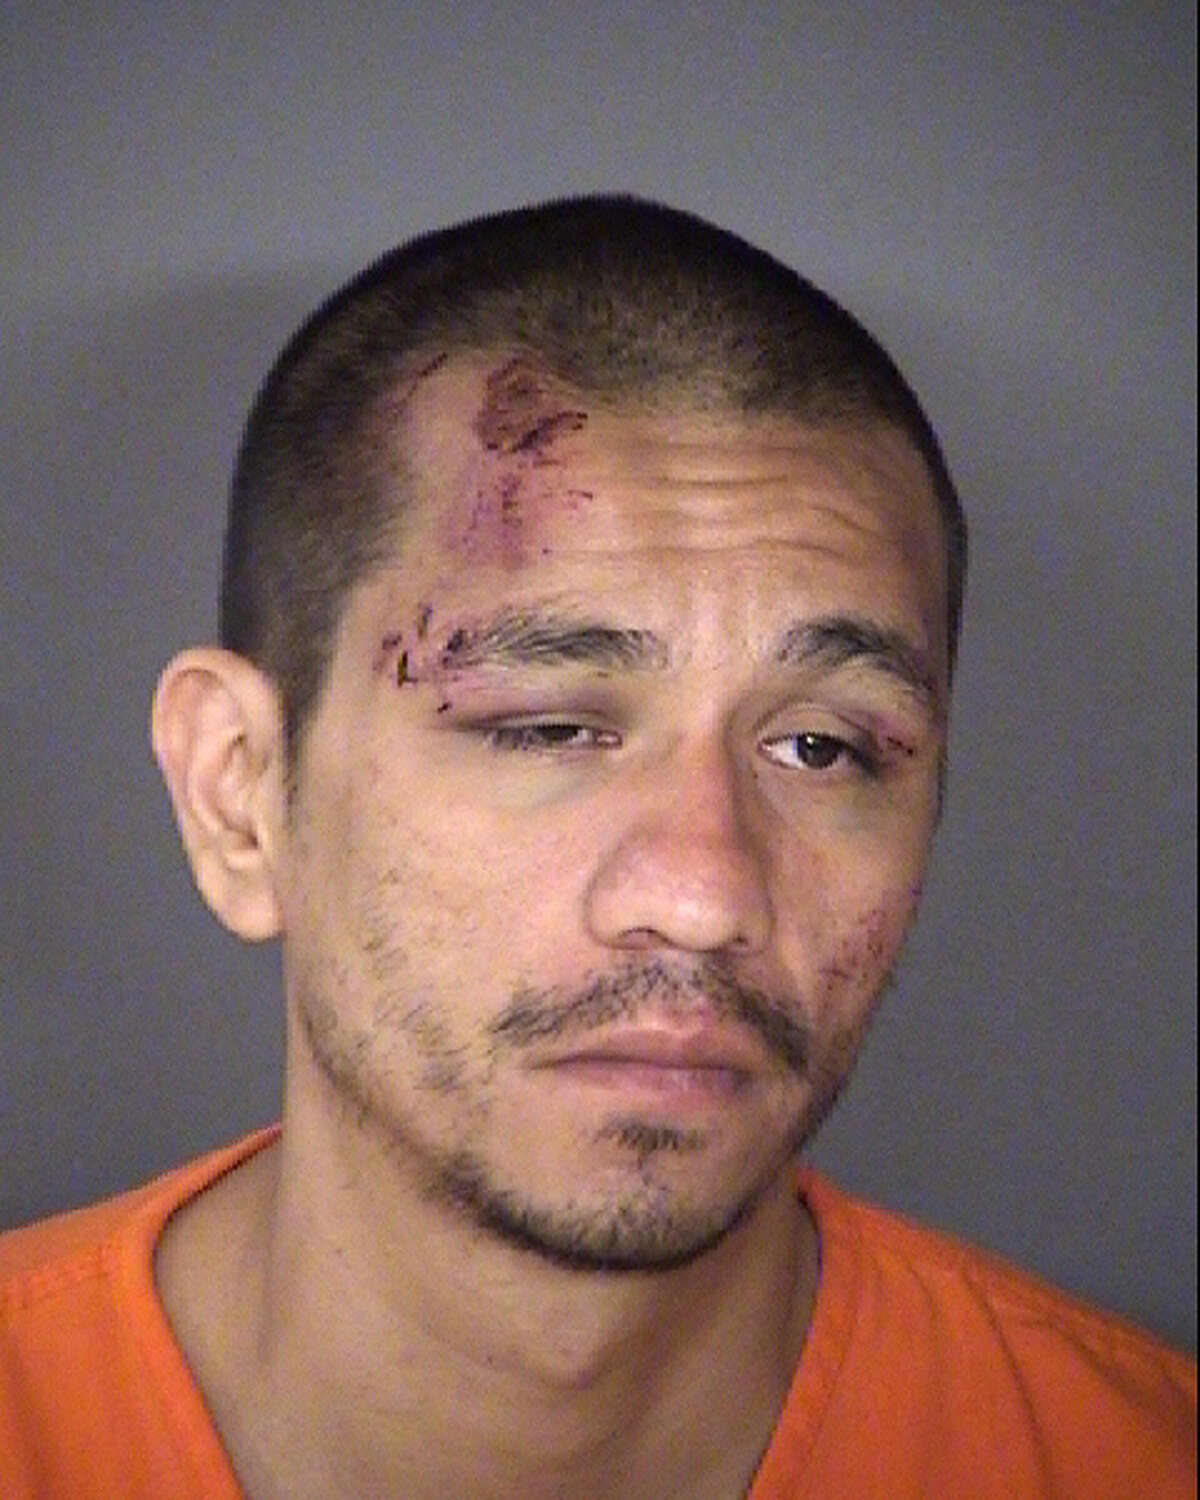 Michael Anthony Fernandez is facing charges of possession of a controlled substance, felony criminal mischief, evading arrest and resisting arrest. He remains in the Bexar County Jail on a $67,000 bond.